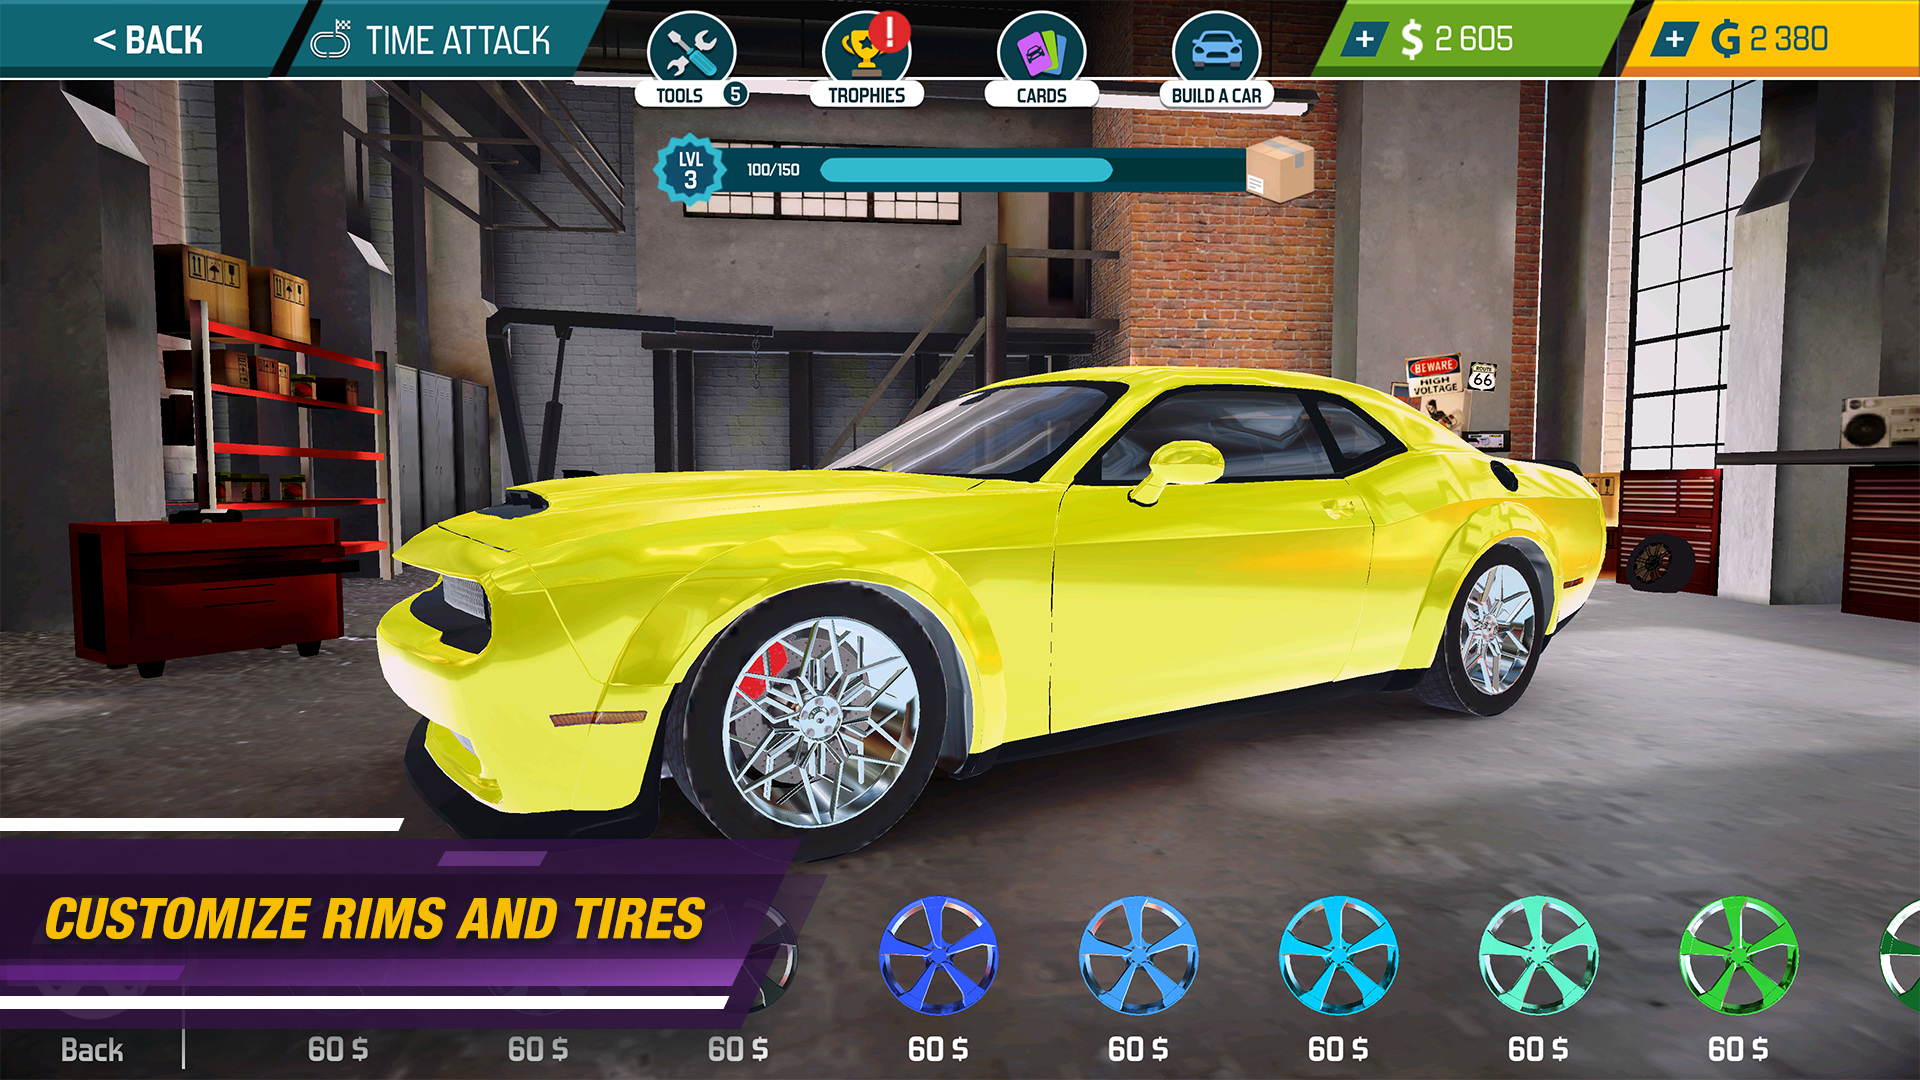 Car Mechanic Simulator Mod Apk - Get yourself as much experience as possible!